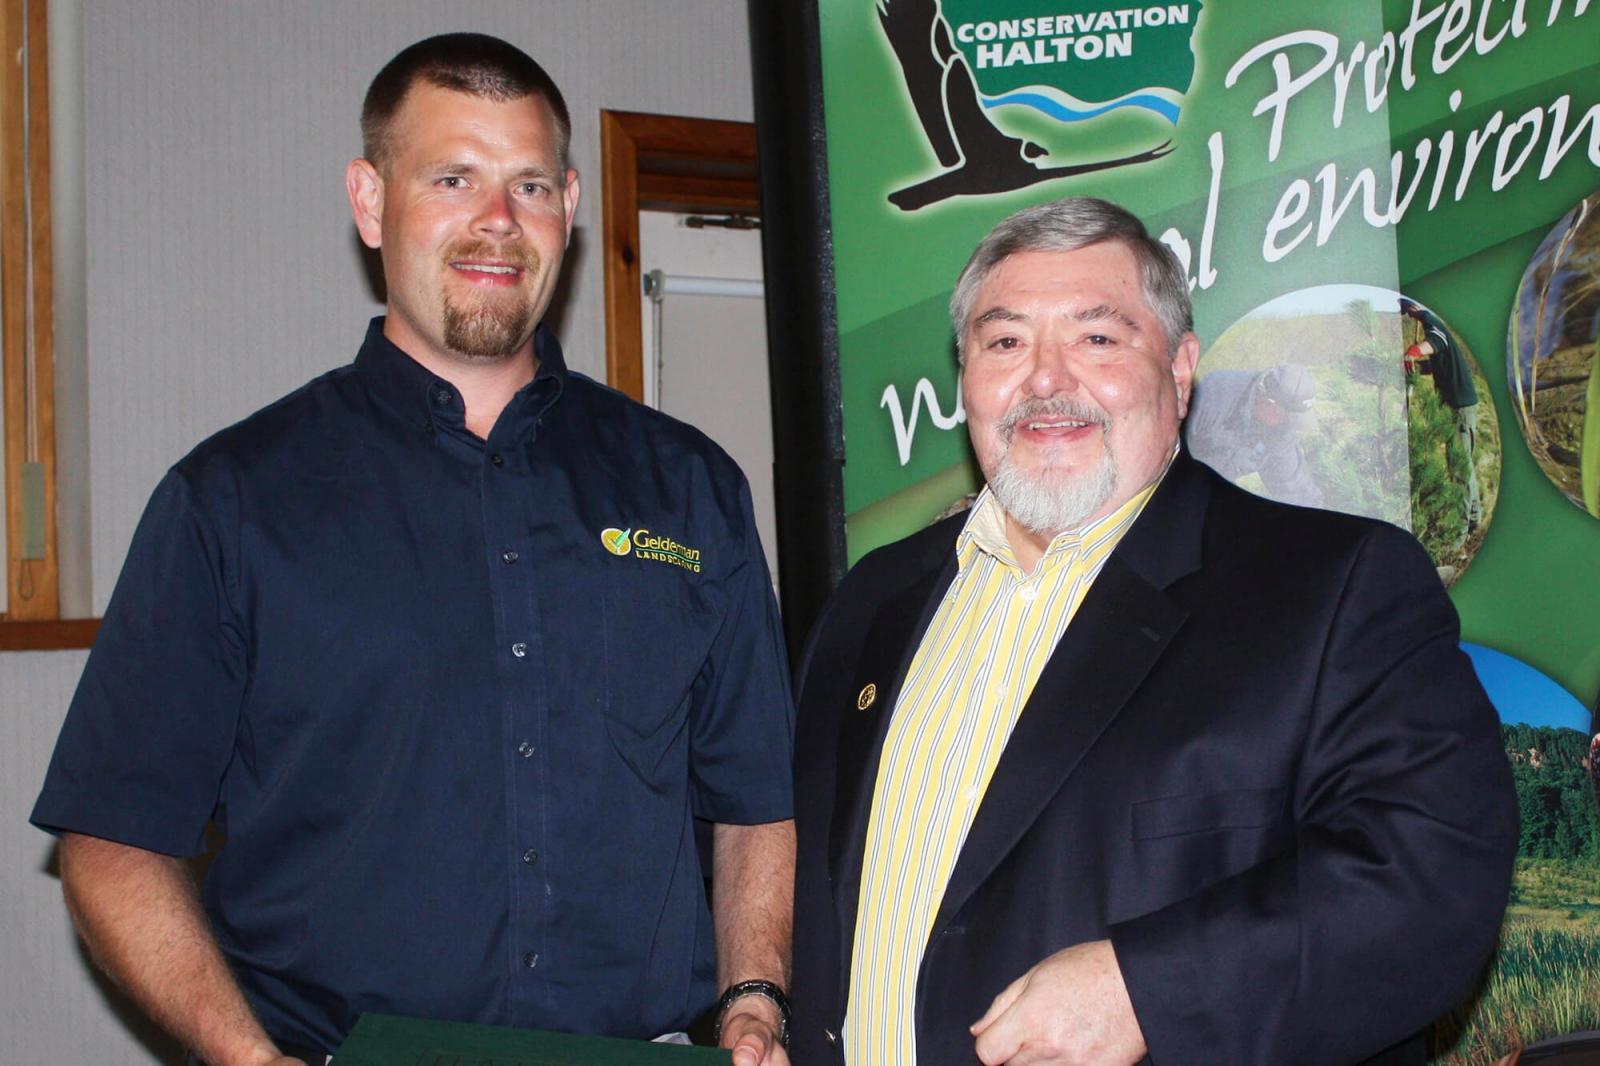 Nathan Helder, left, receives his award from Conservation Halton chair Brian Penman.